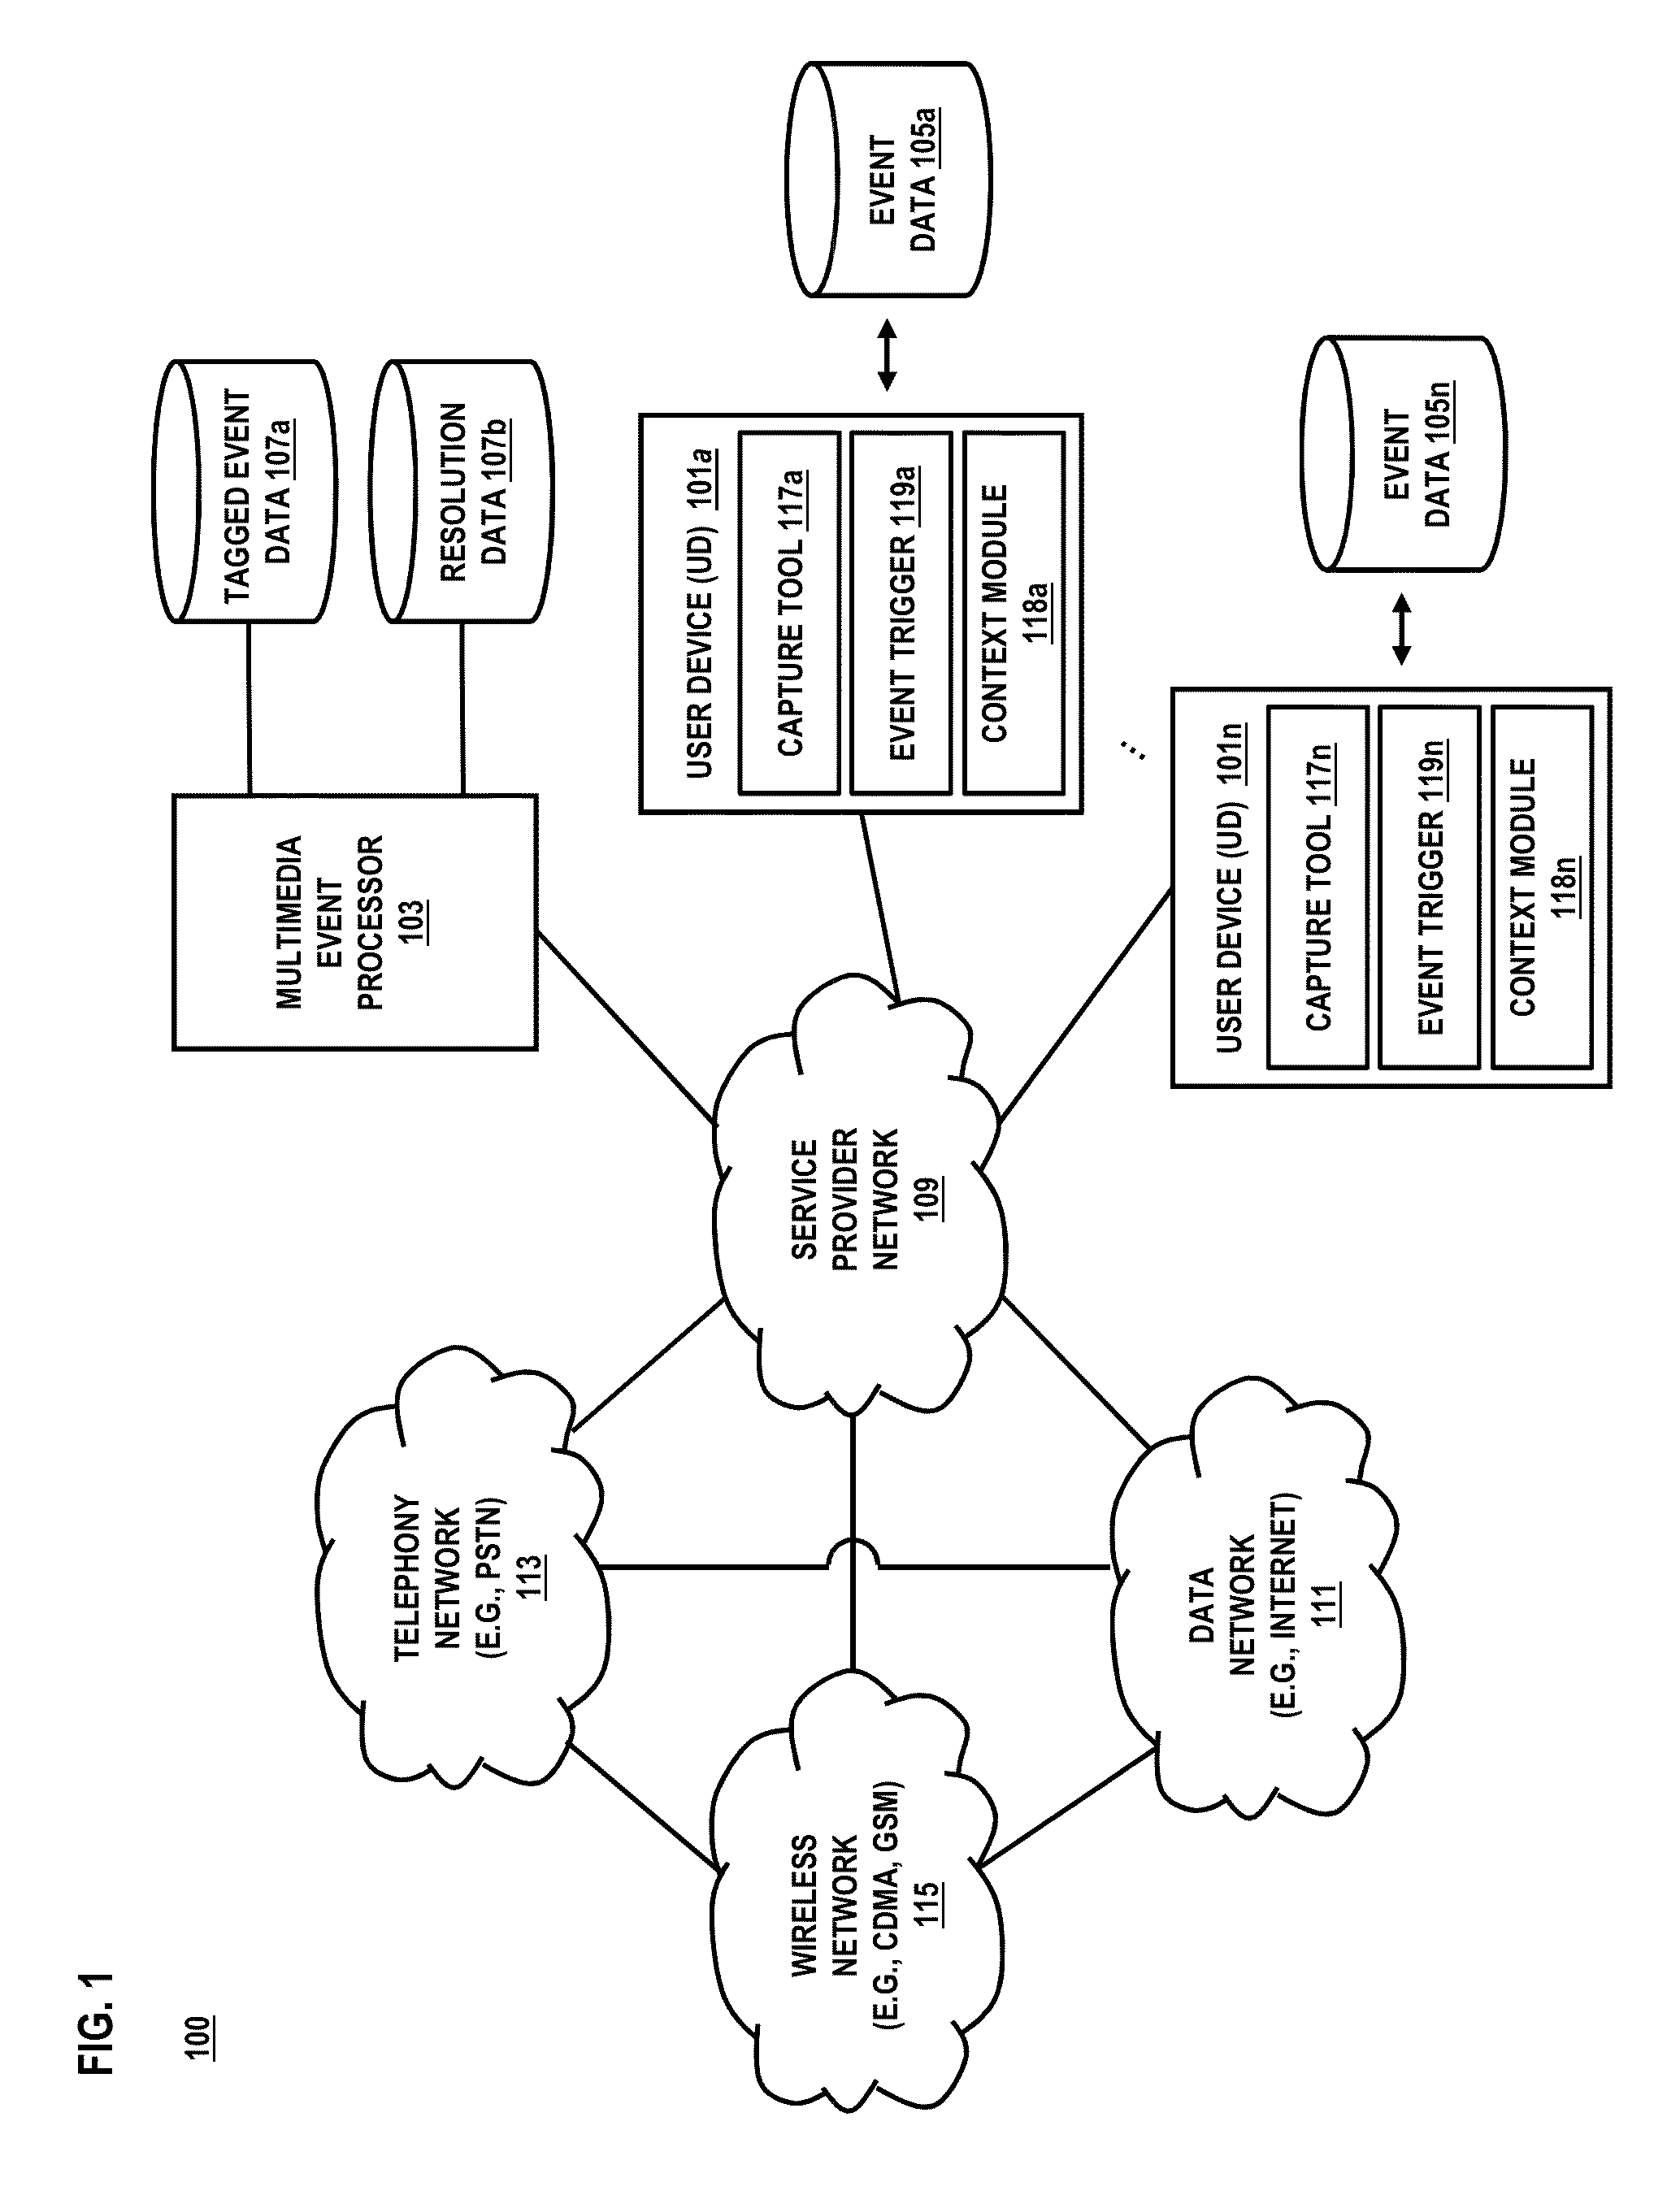 Method and system for generating emergency notifications based on aggregate event data